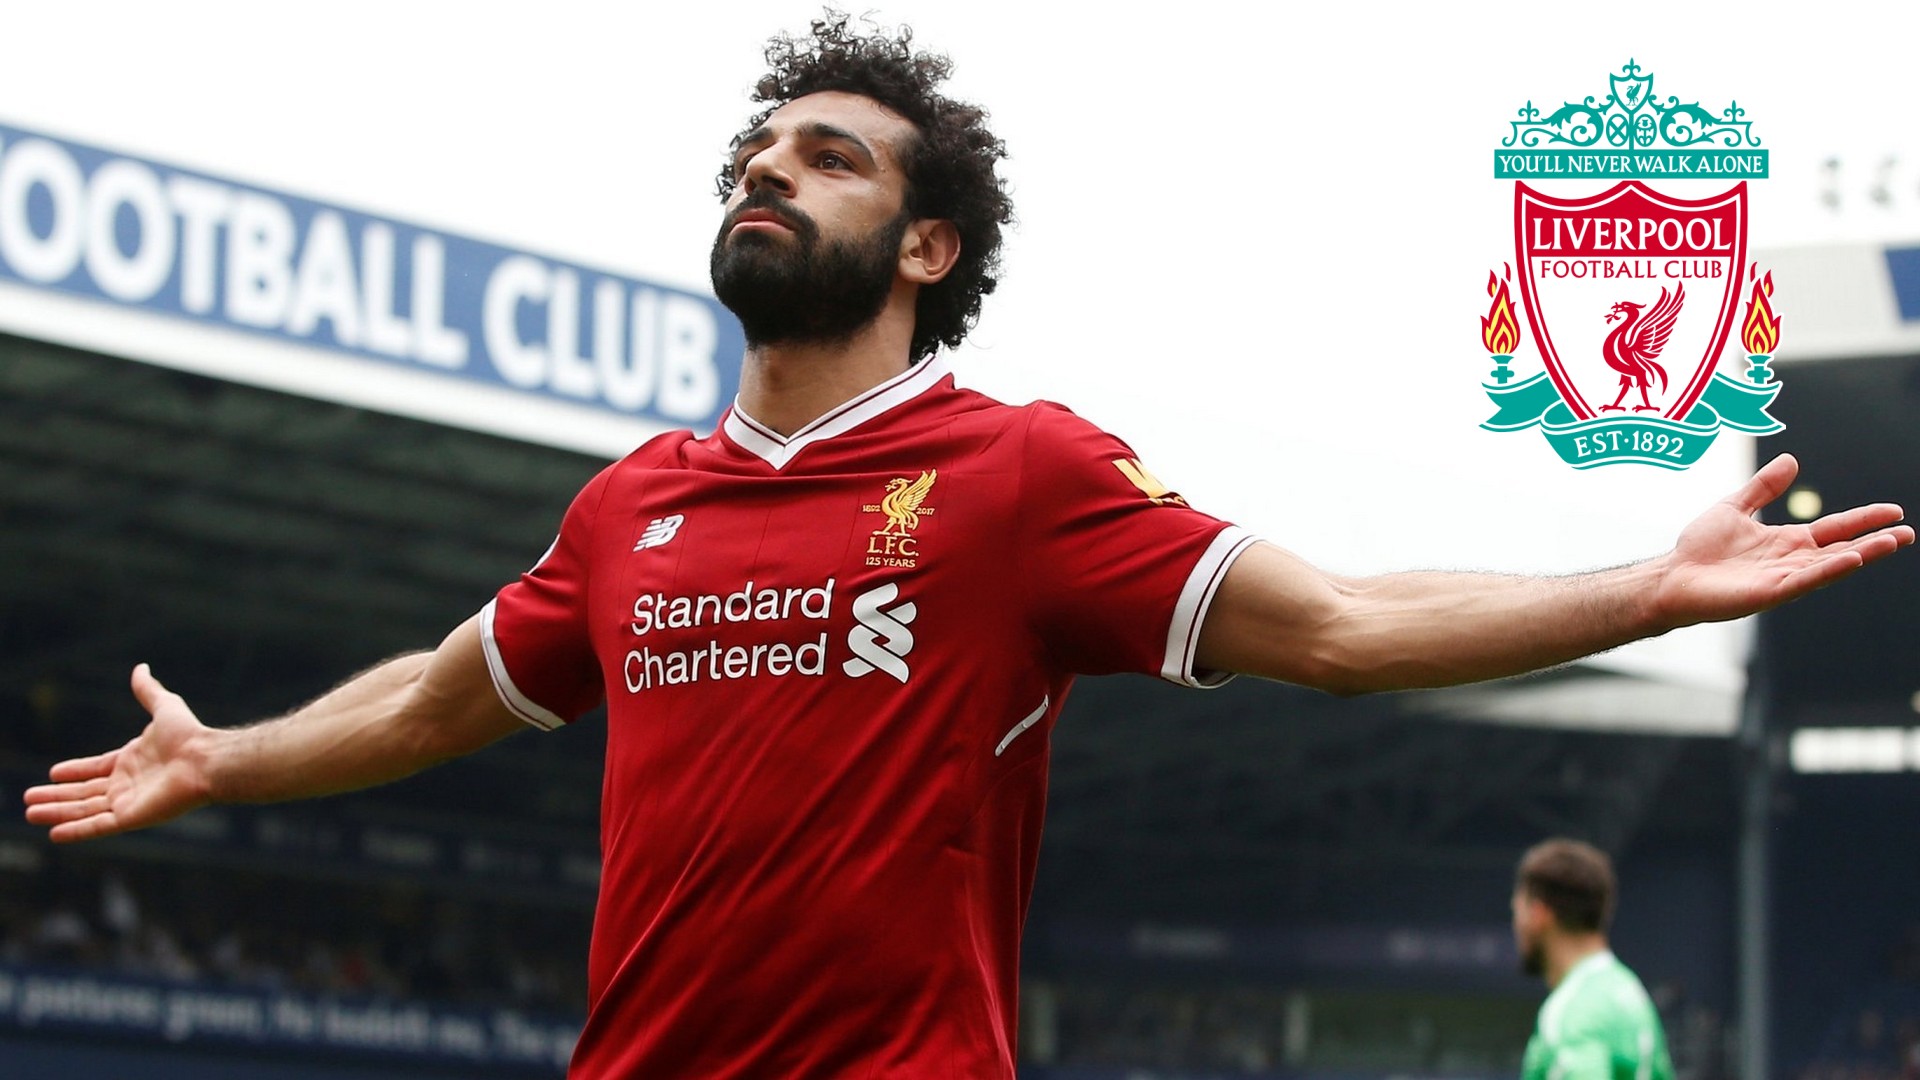 Mohamed Salah Wallpaper with image resolution 1920x1080 pixel. You can use this wallpaper as background for your desktop Computer Screensavers, Android or iPhone smartphones